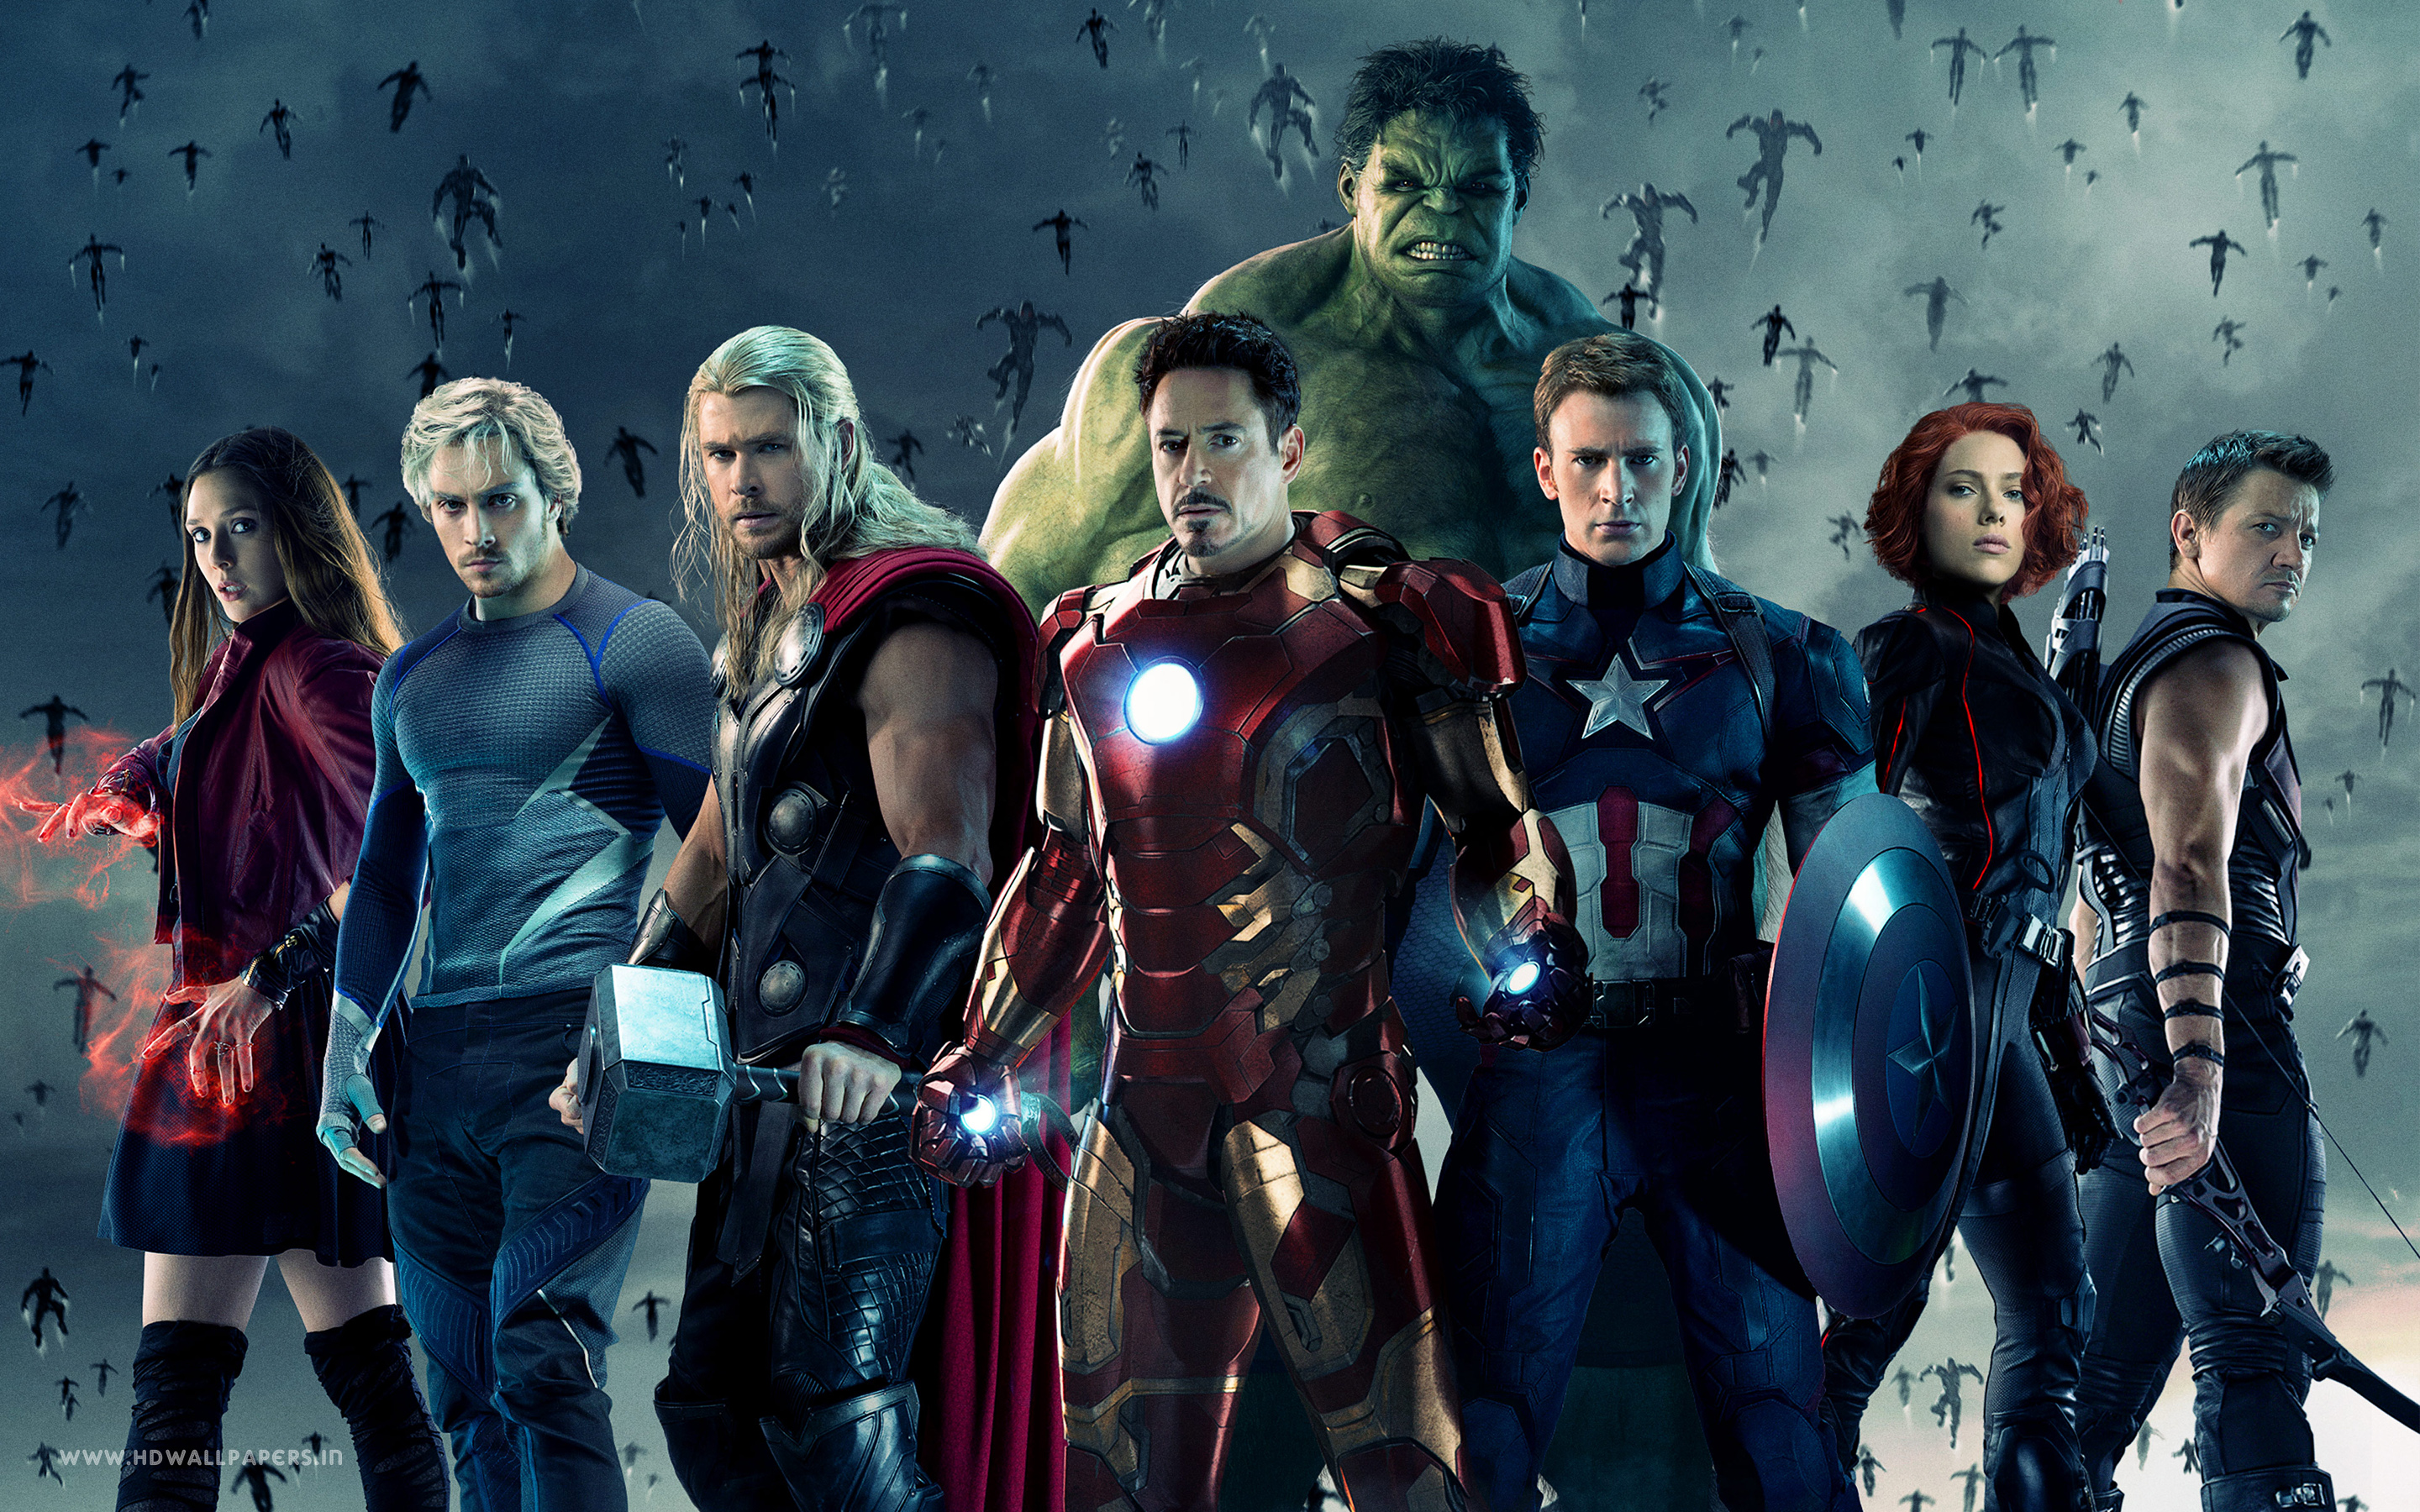 marvel avengers age of ultron full movie in hindi download mp4moviez